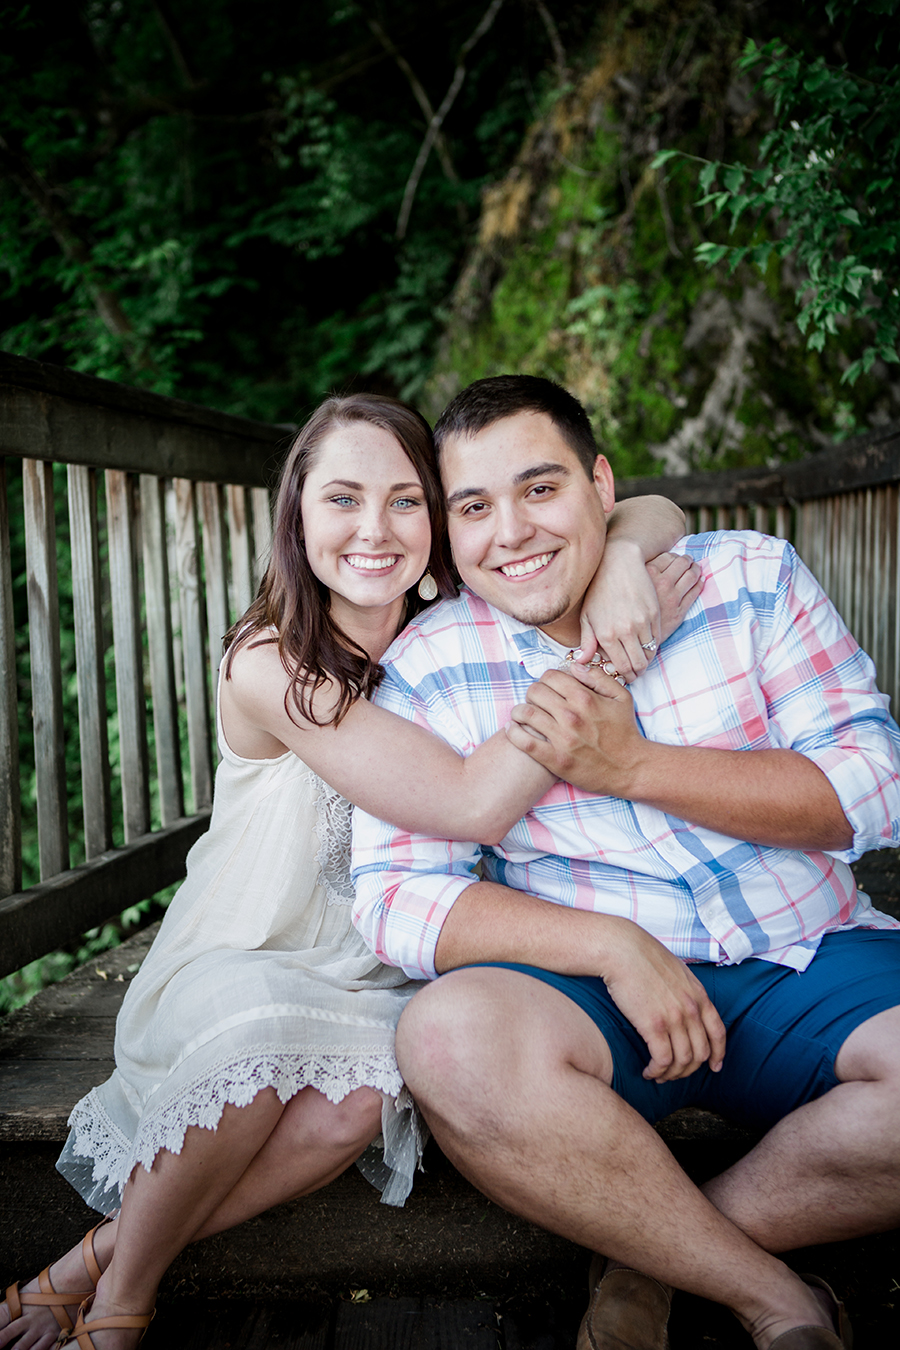 Her arms around his neck sitting down engagement photo by Knoxville Wedding Photographer, Amanda May Photos.